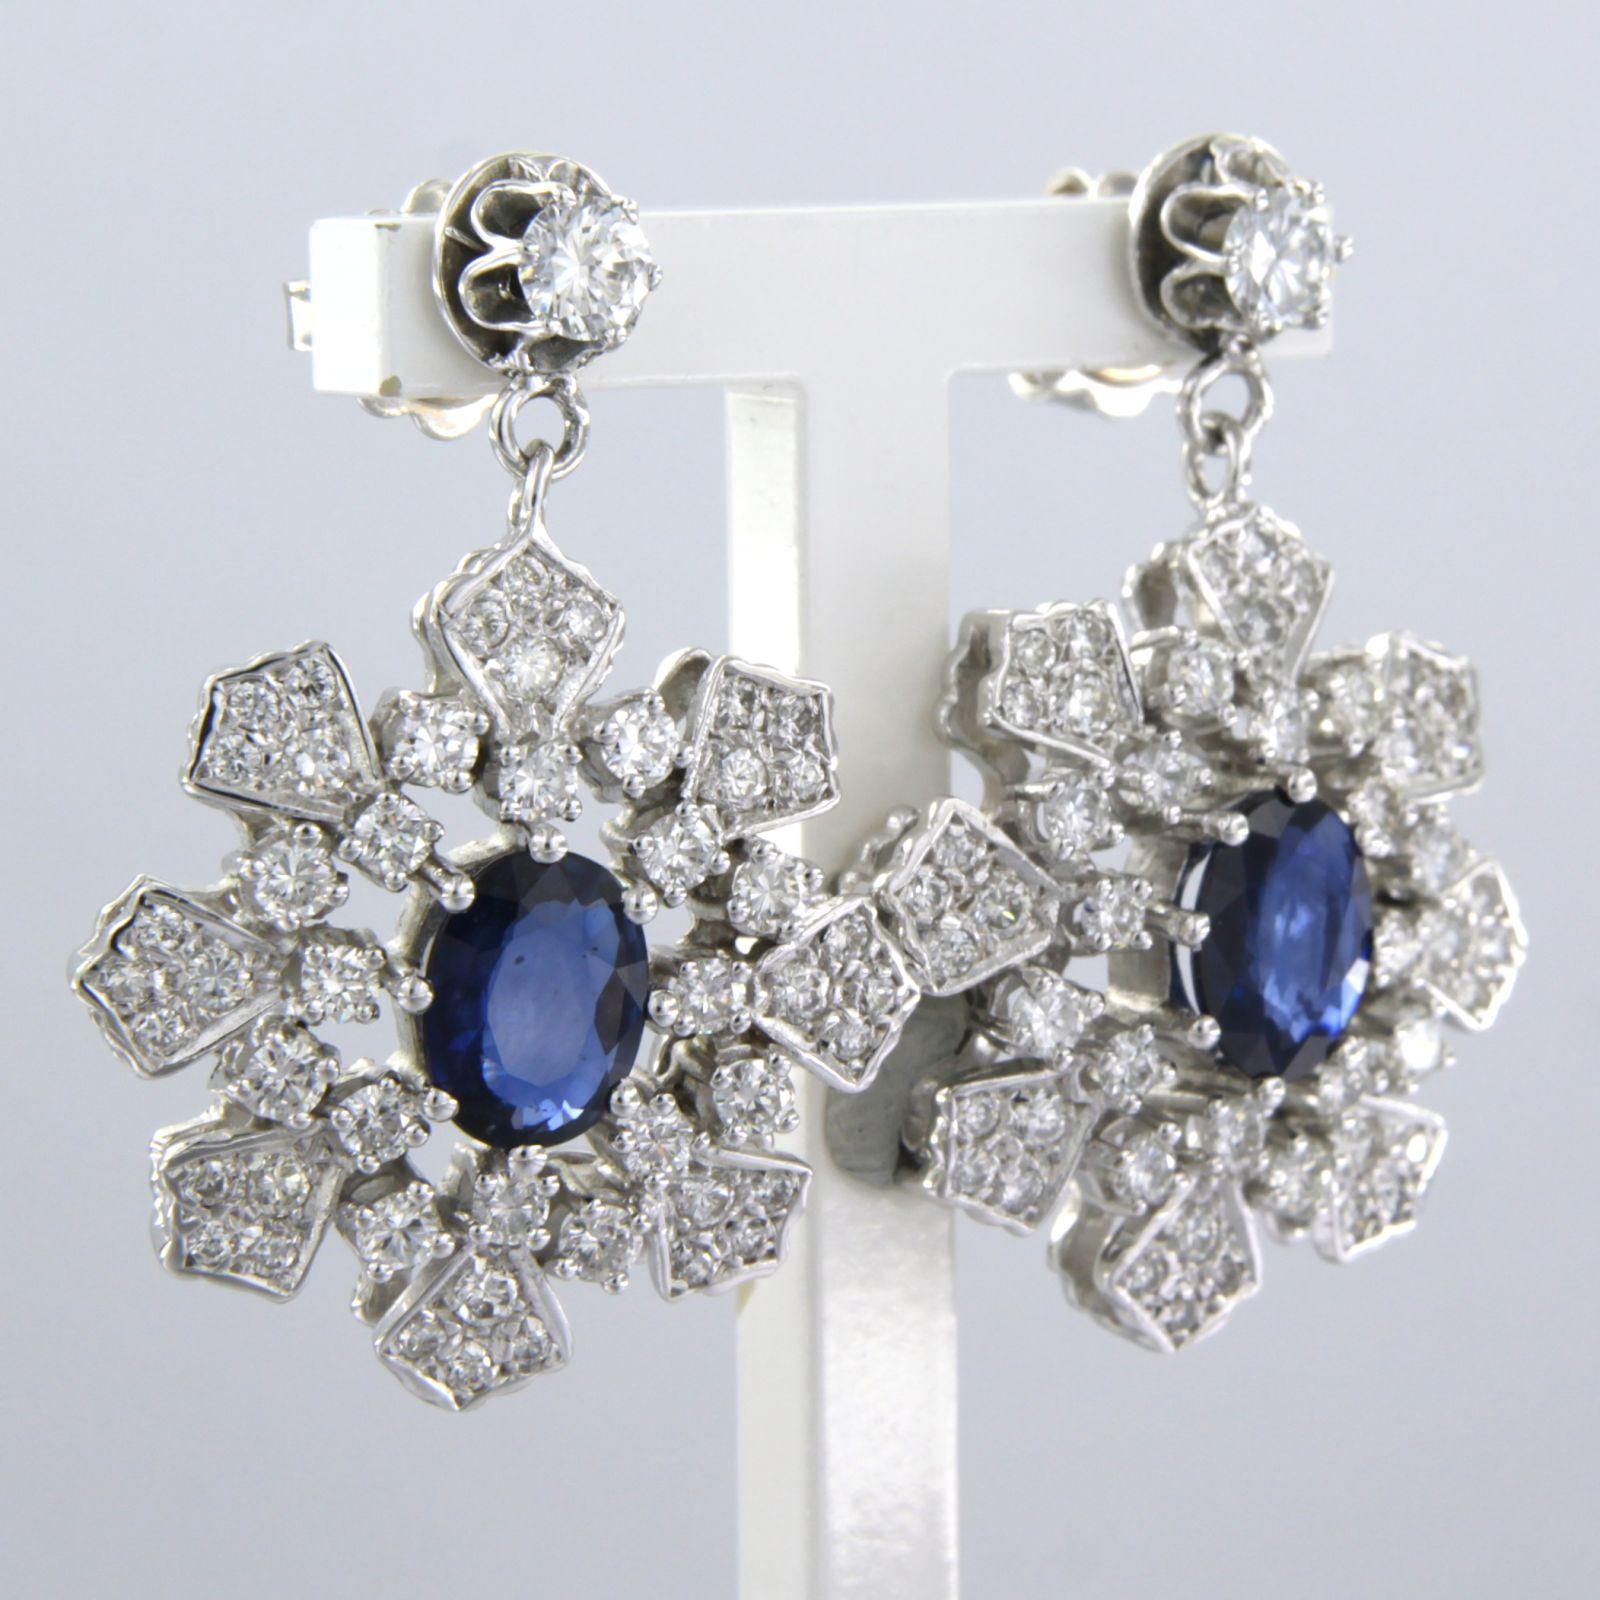 18k white gold earrings set with sapphire up to. 2.40ct and brilliant cut diamonds up to. 2.40ct - F/G - VS/SI

detailed description

the size of the earring is 3.3 cm long by 2.2 cm wide

weight 16.0 grams

set with

- 2 x 8.2 mm x 6.0 mm oval